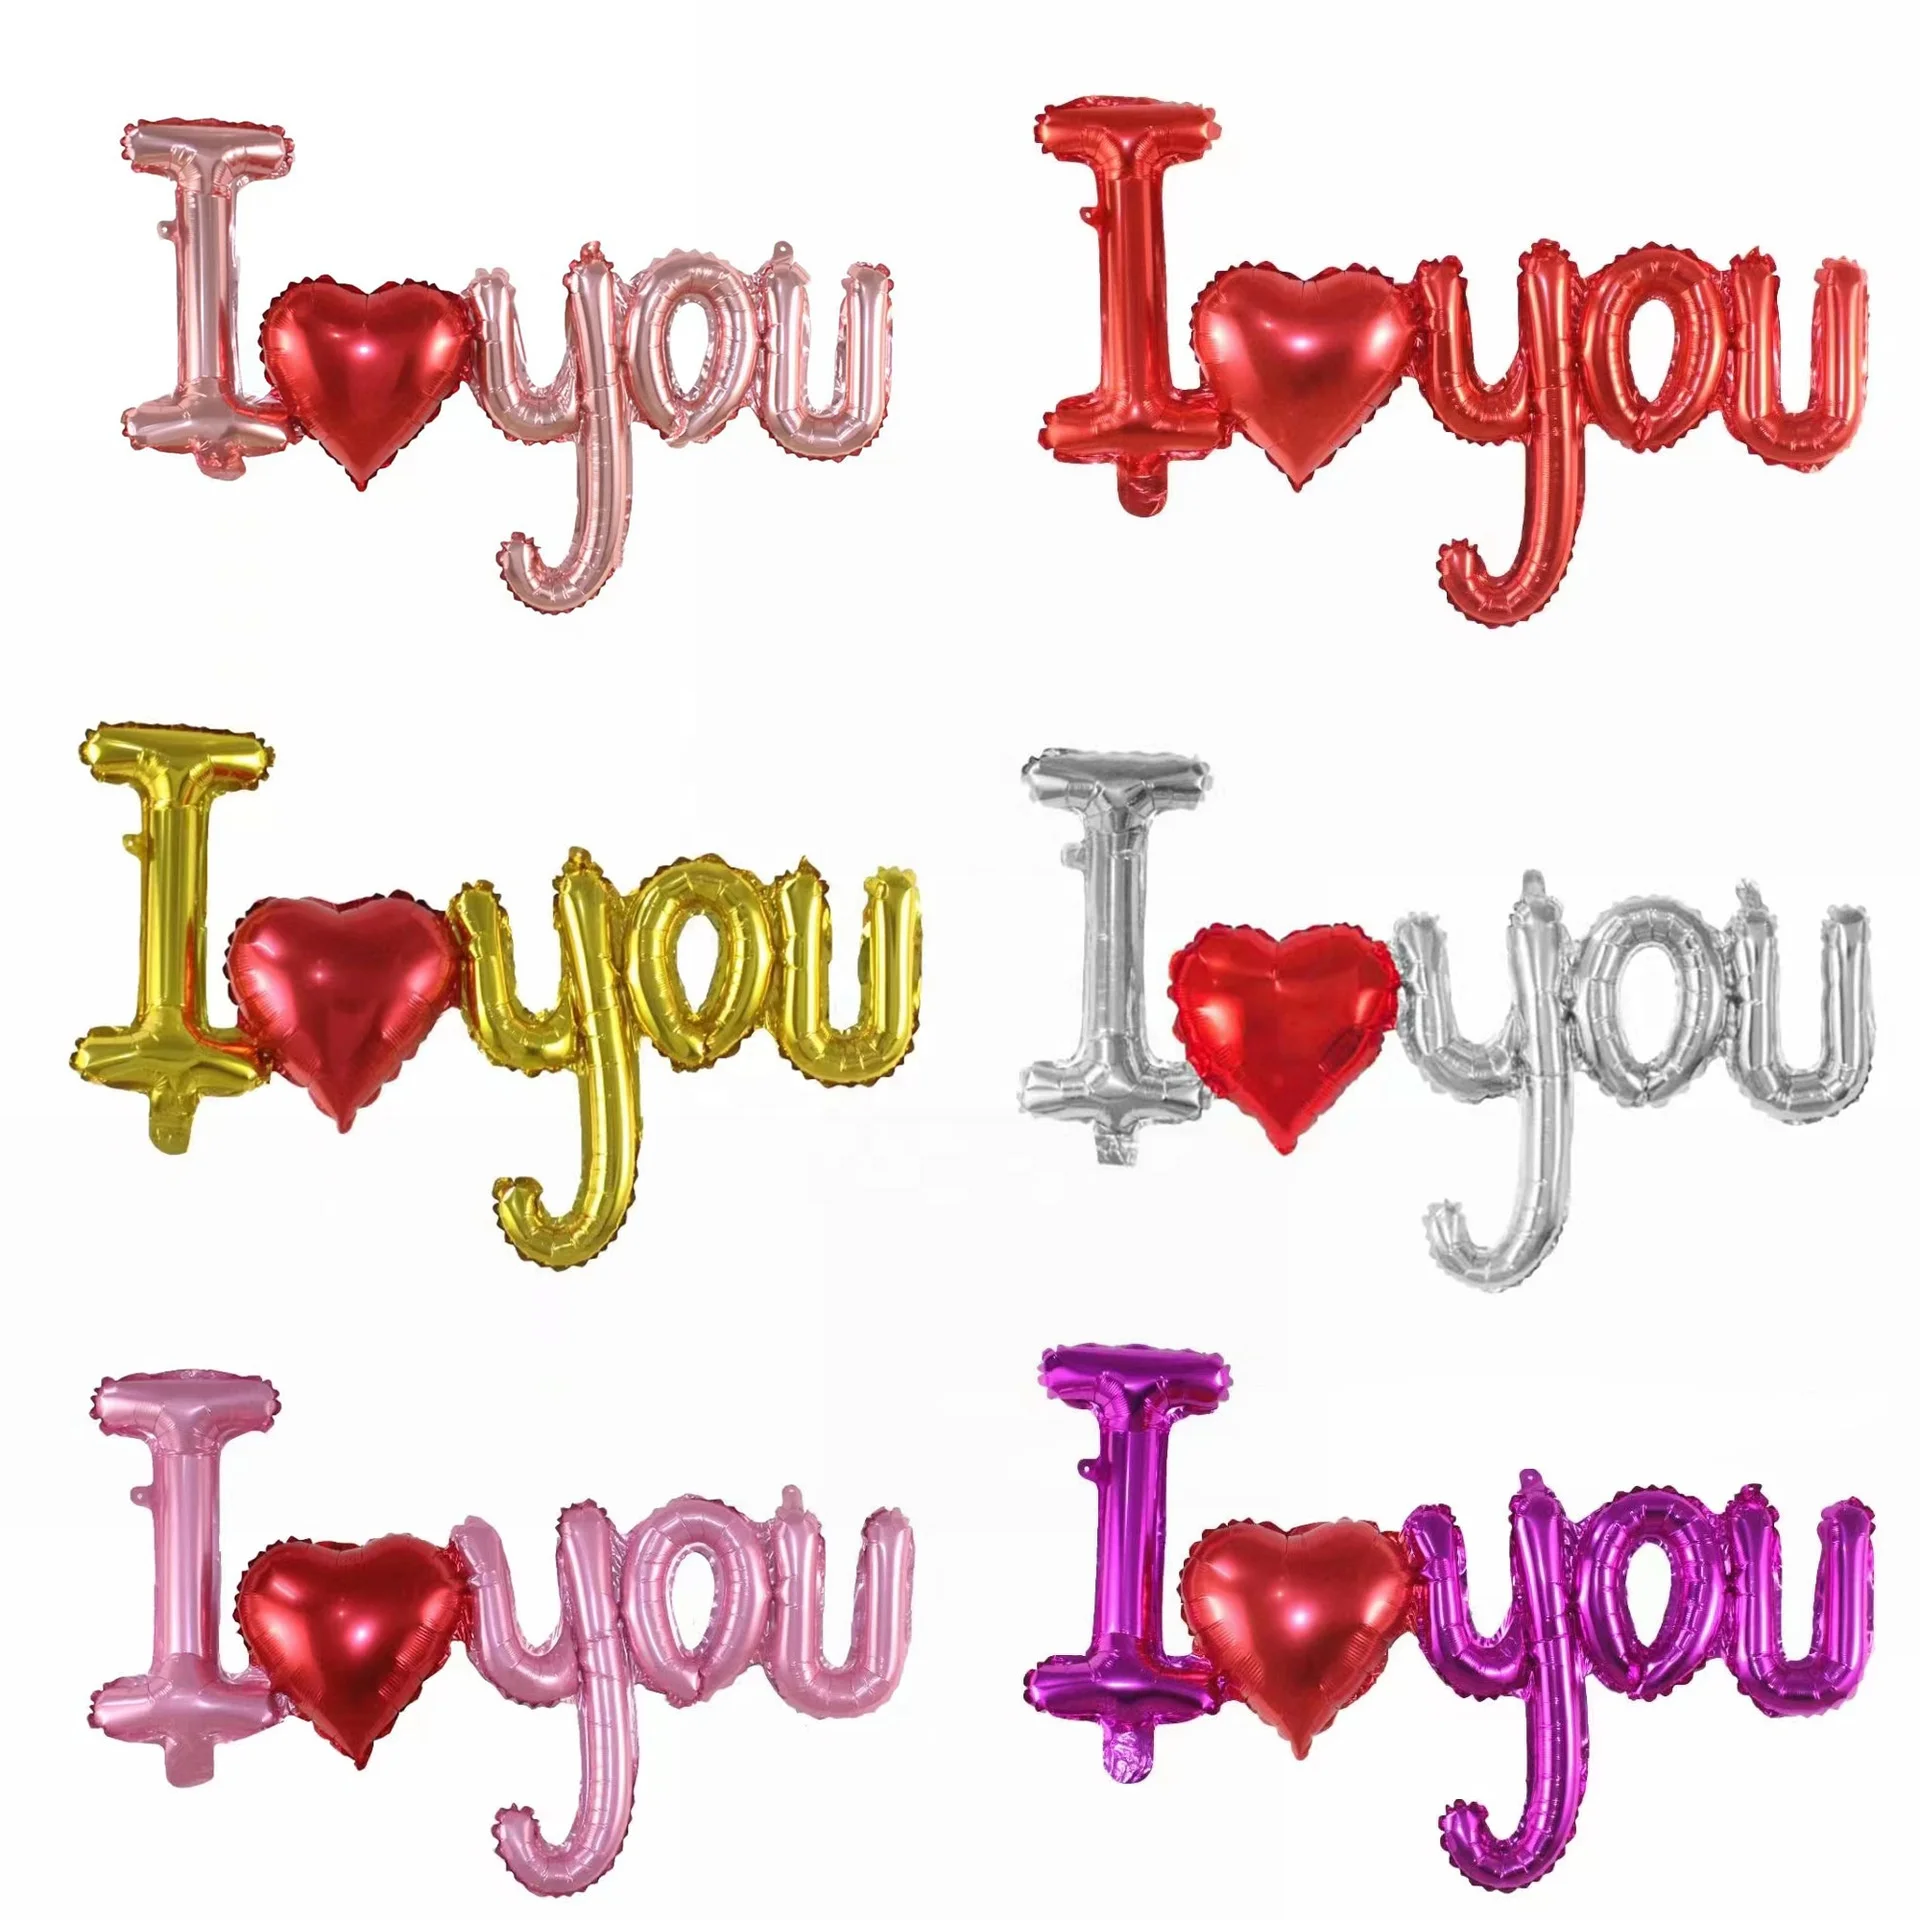 

I Love You Balloons Red Love Heart Shaped Silver Letters Foil Balloons I Love U Banner for Valentines Day Party Engagement